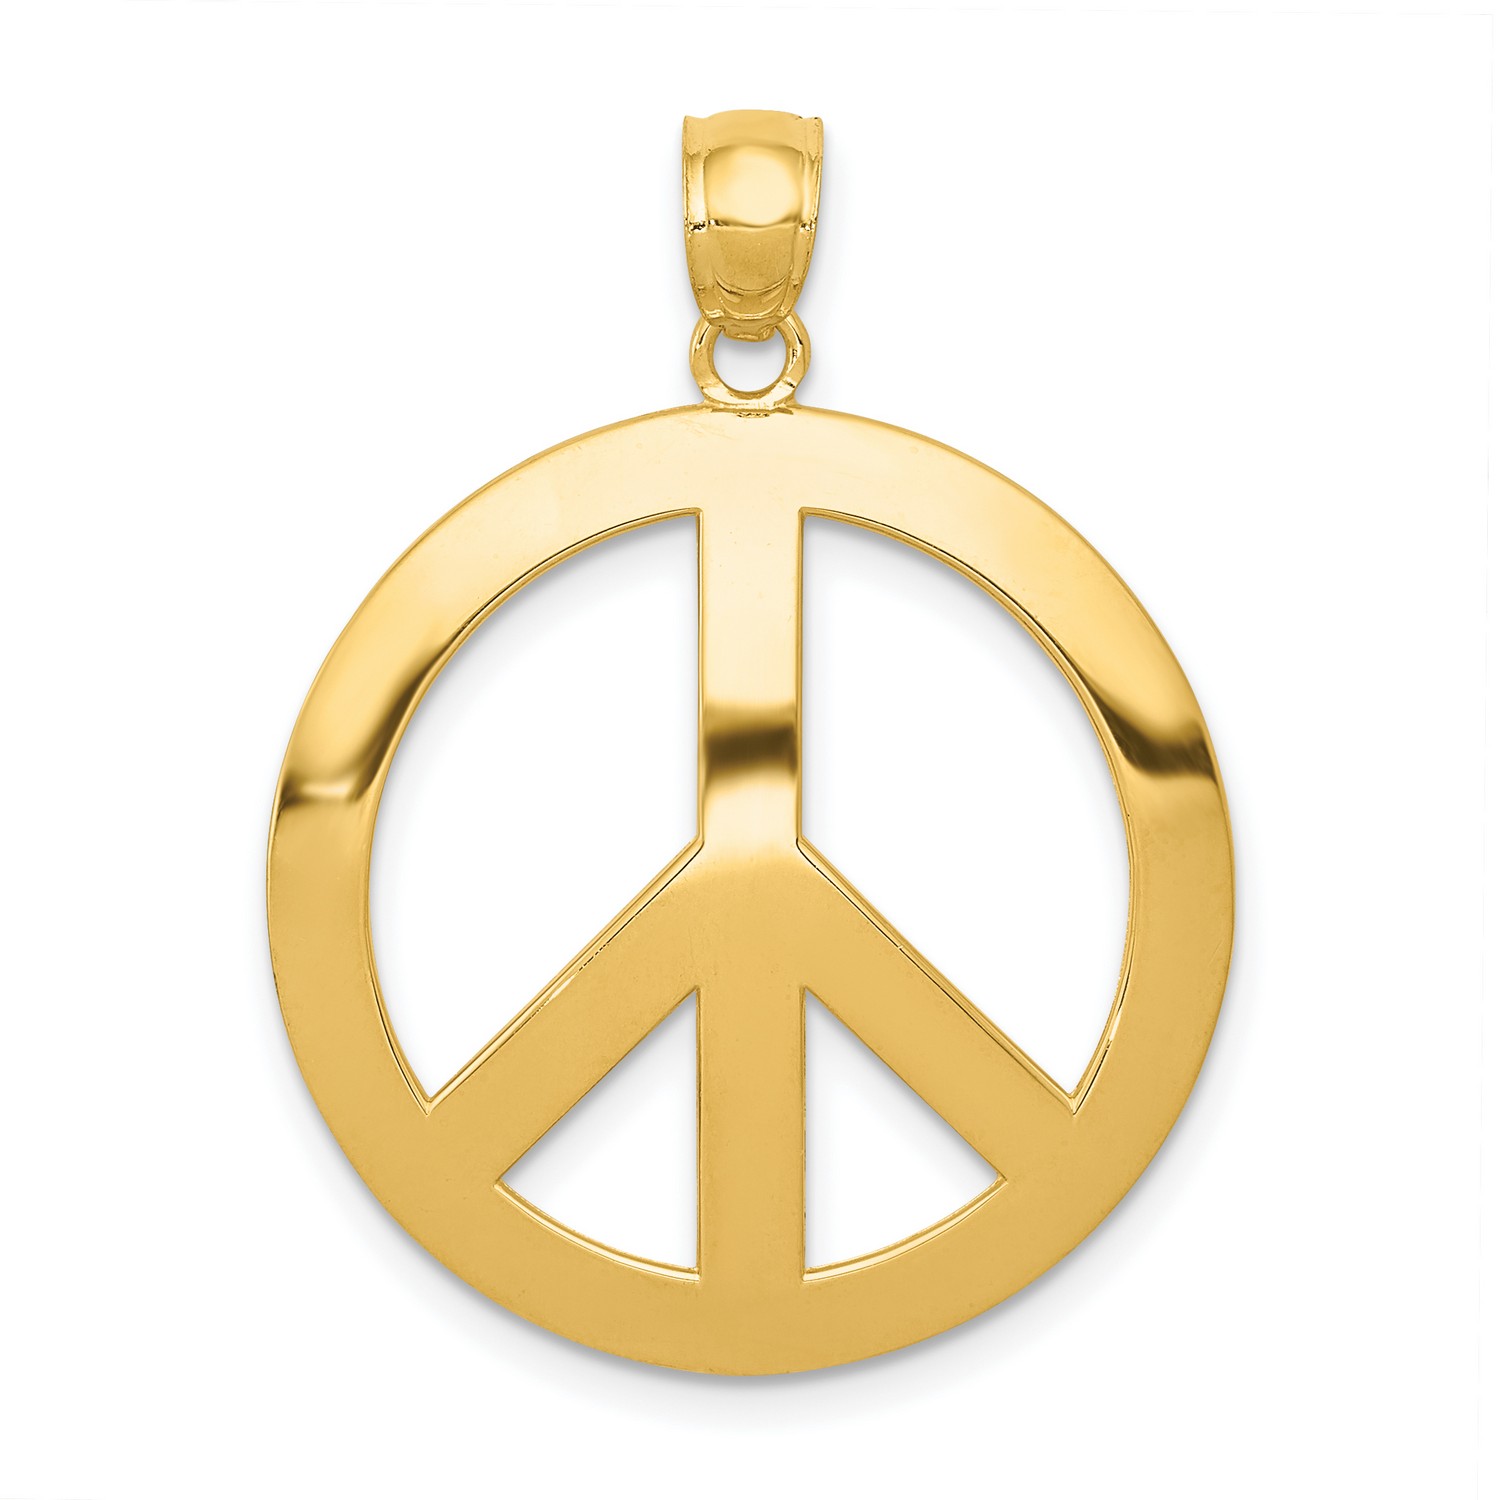 Pre-owned Jewelry Stores Network 14k Yellow Gold Polished Peace Symbol Charm Pendant